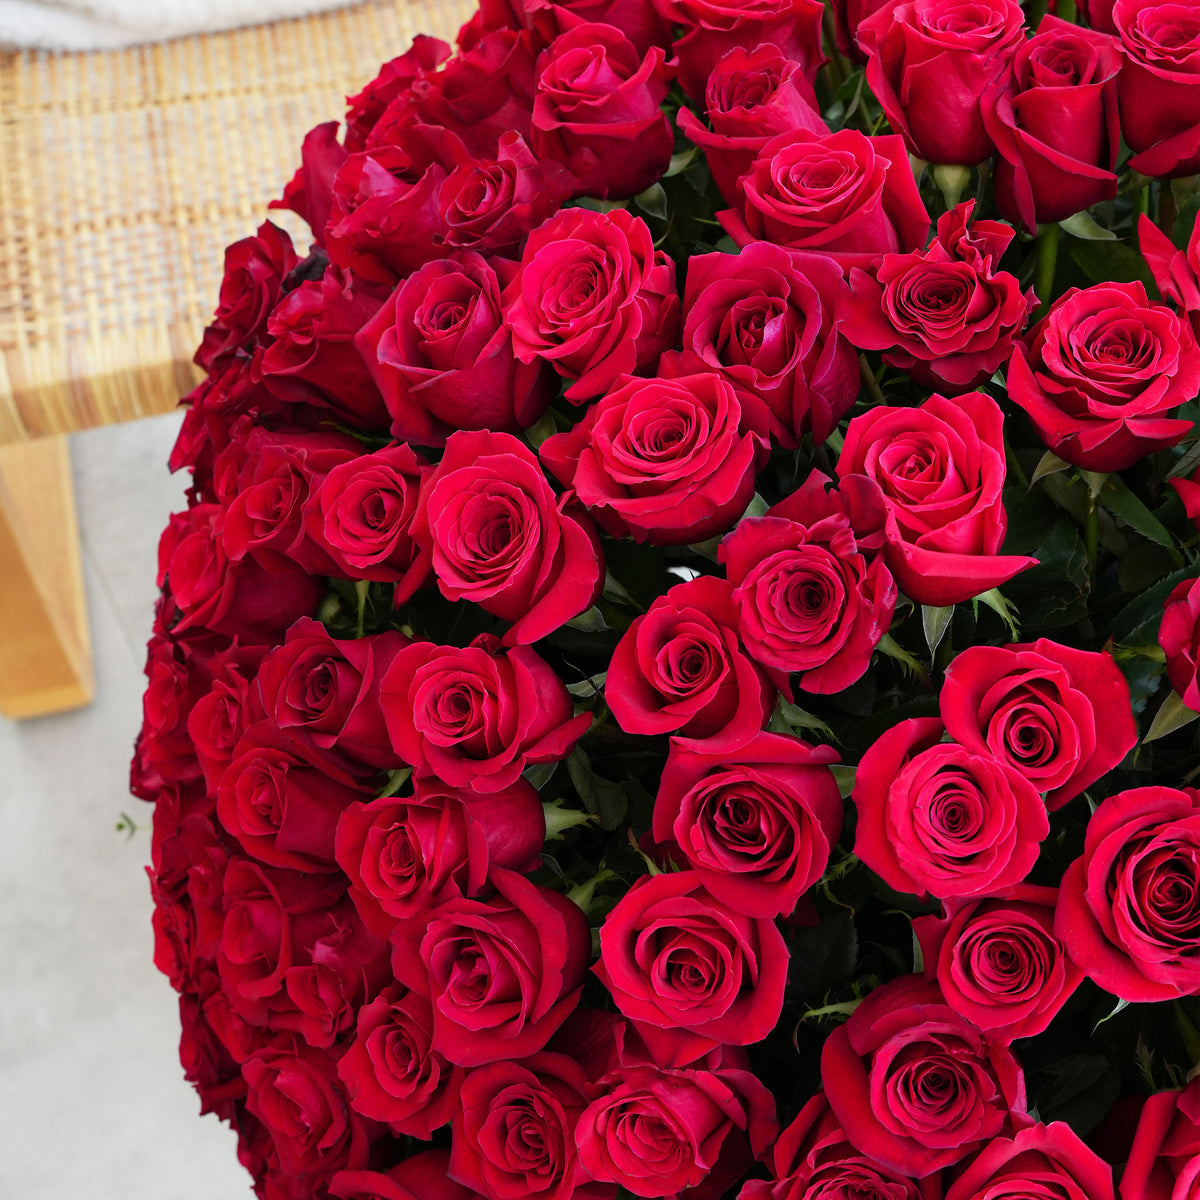 365 Red Roses - Hatbox